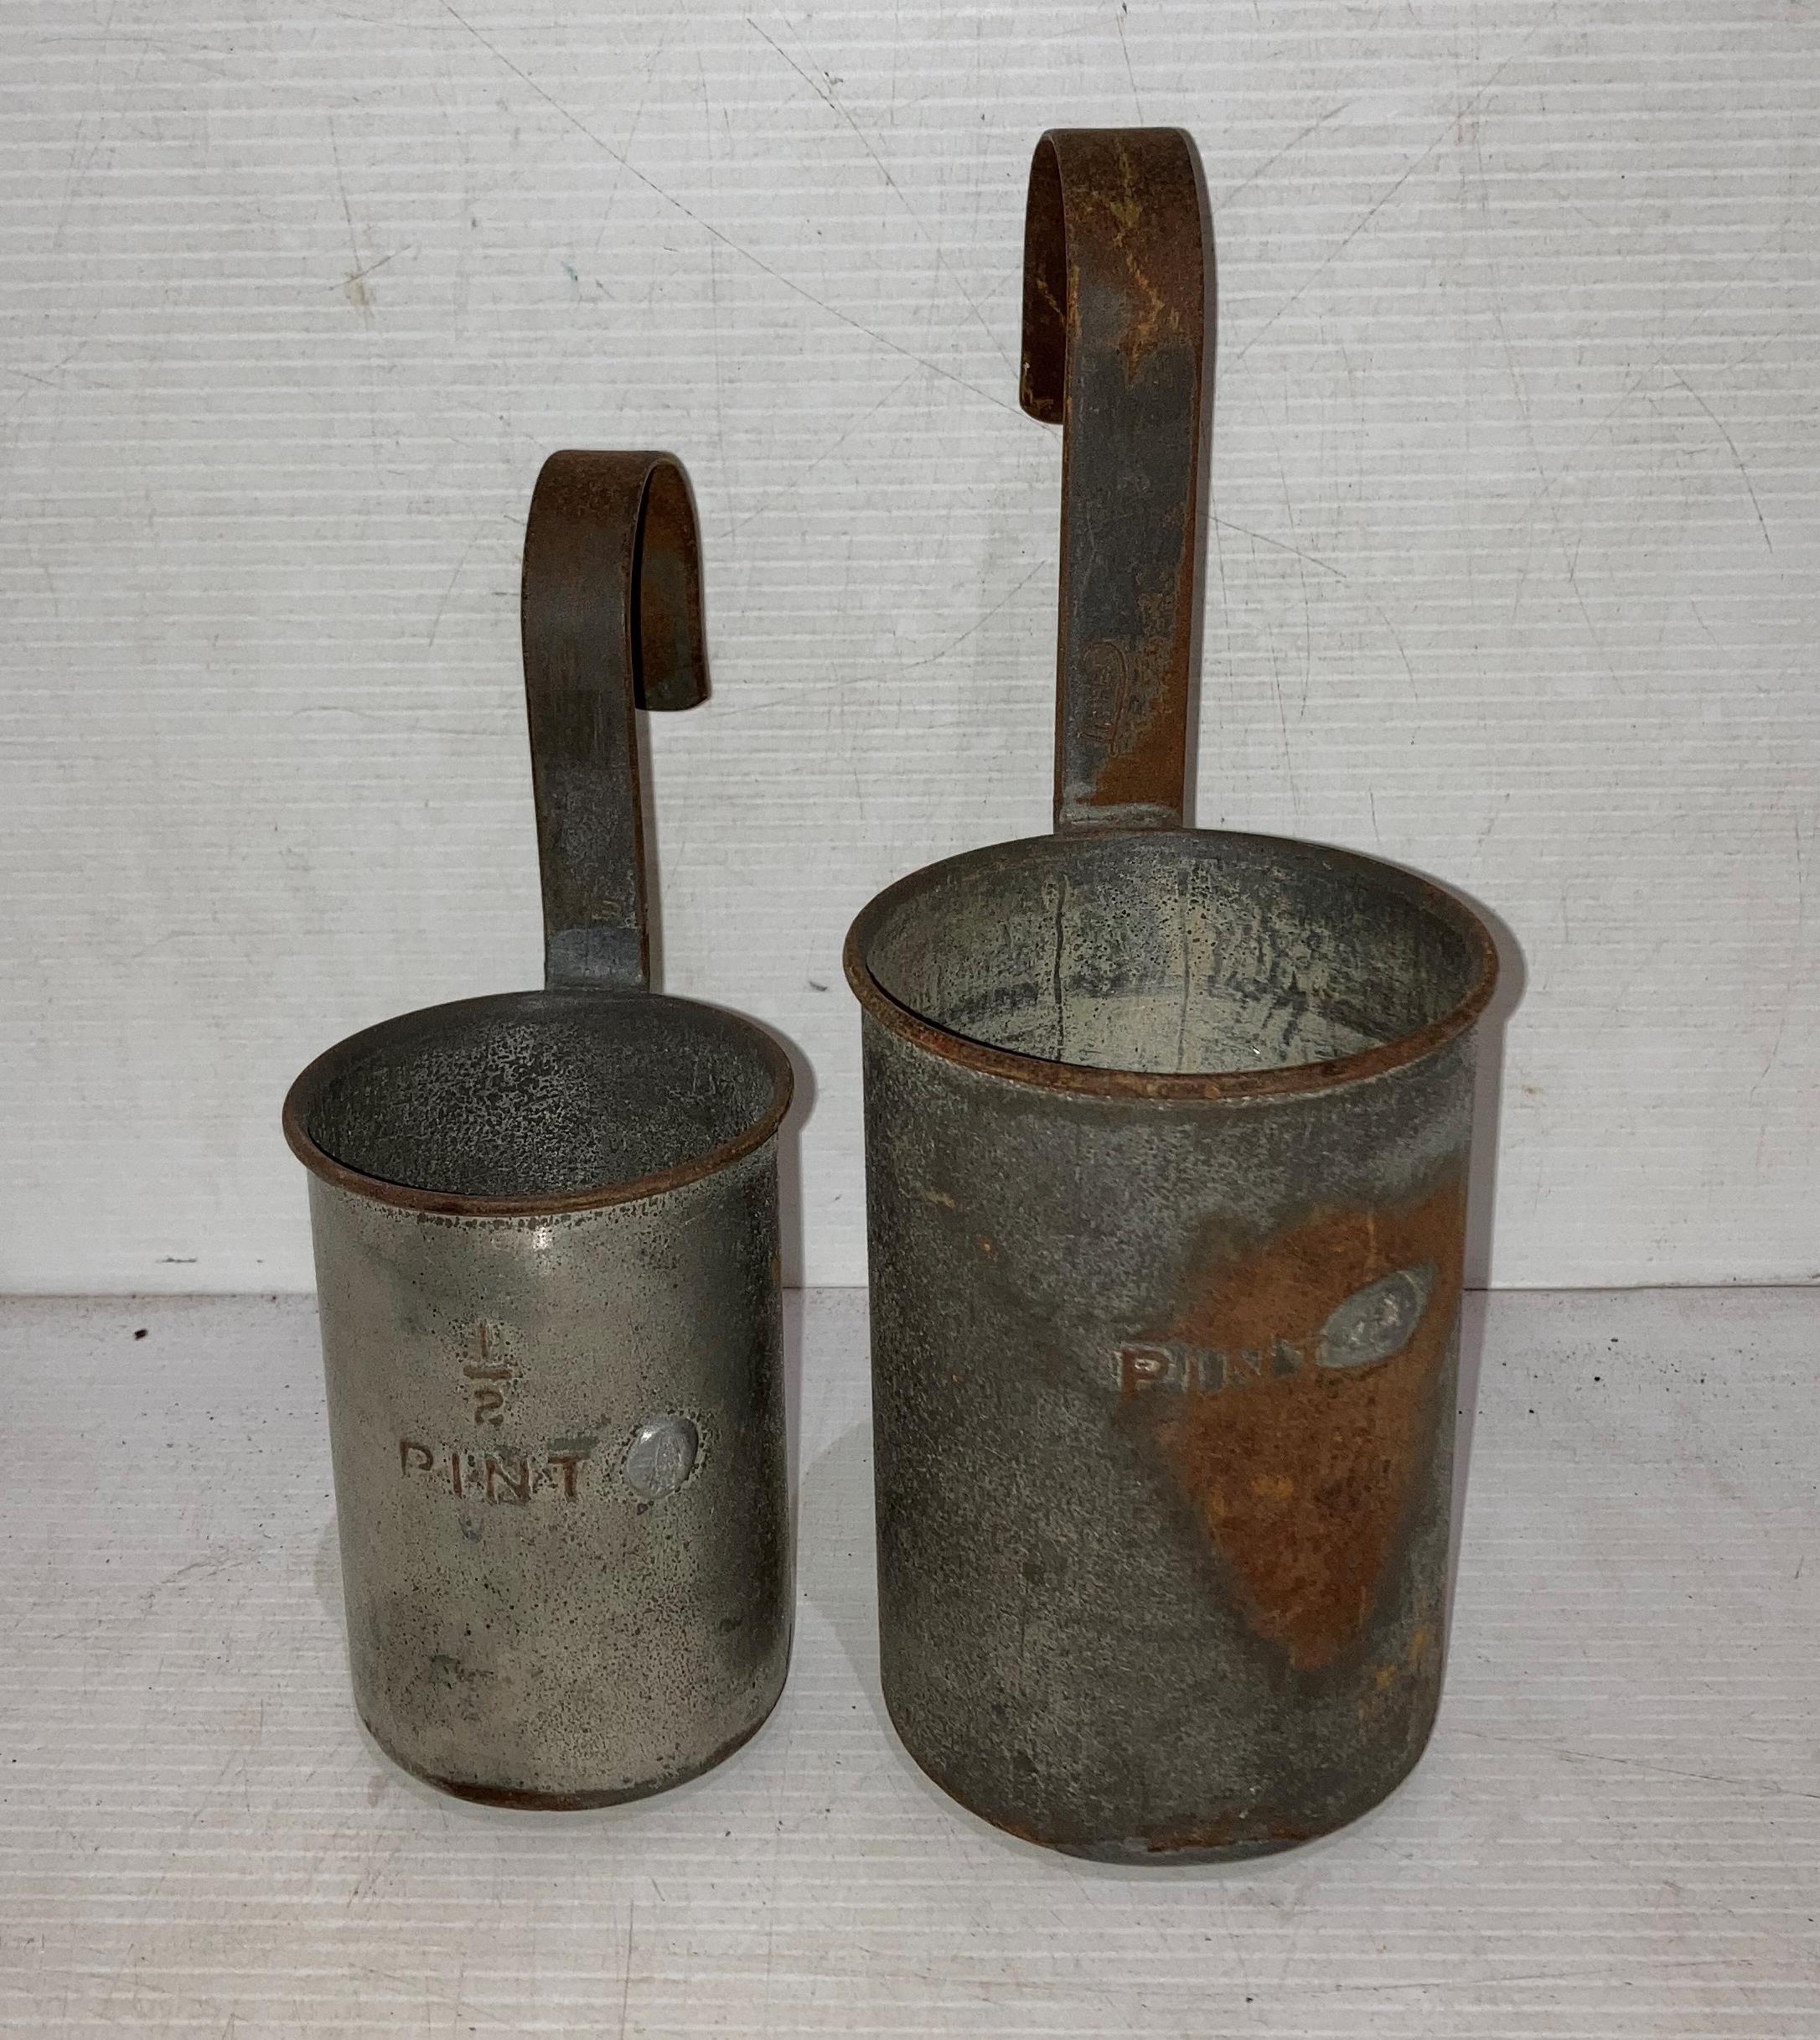 Contents to two vintage metal ½ pint measuring tubs, - Image 3 of 3